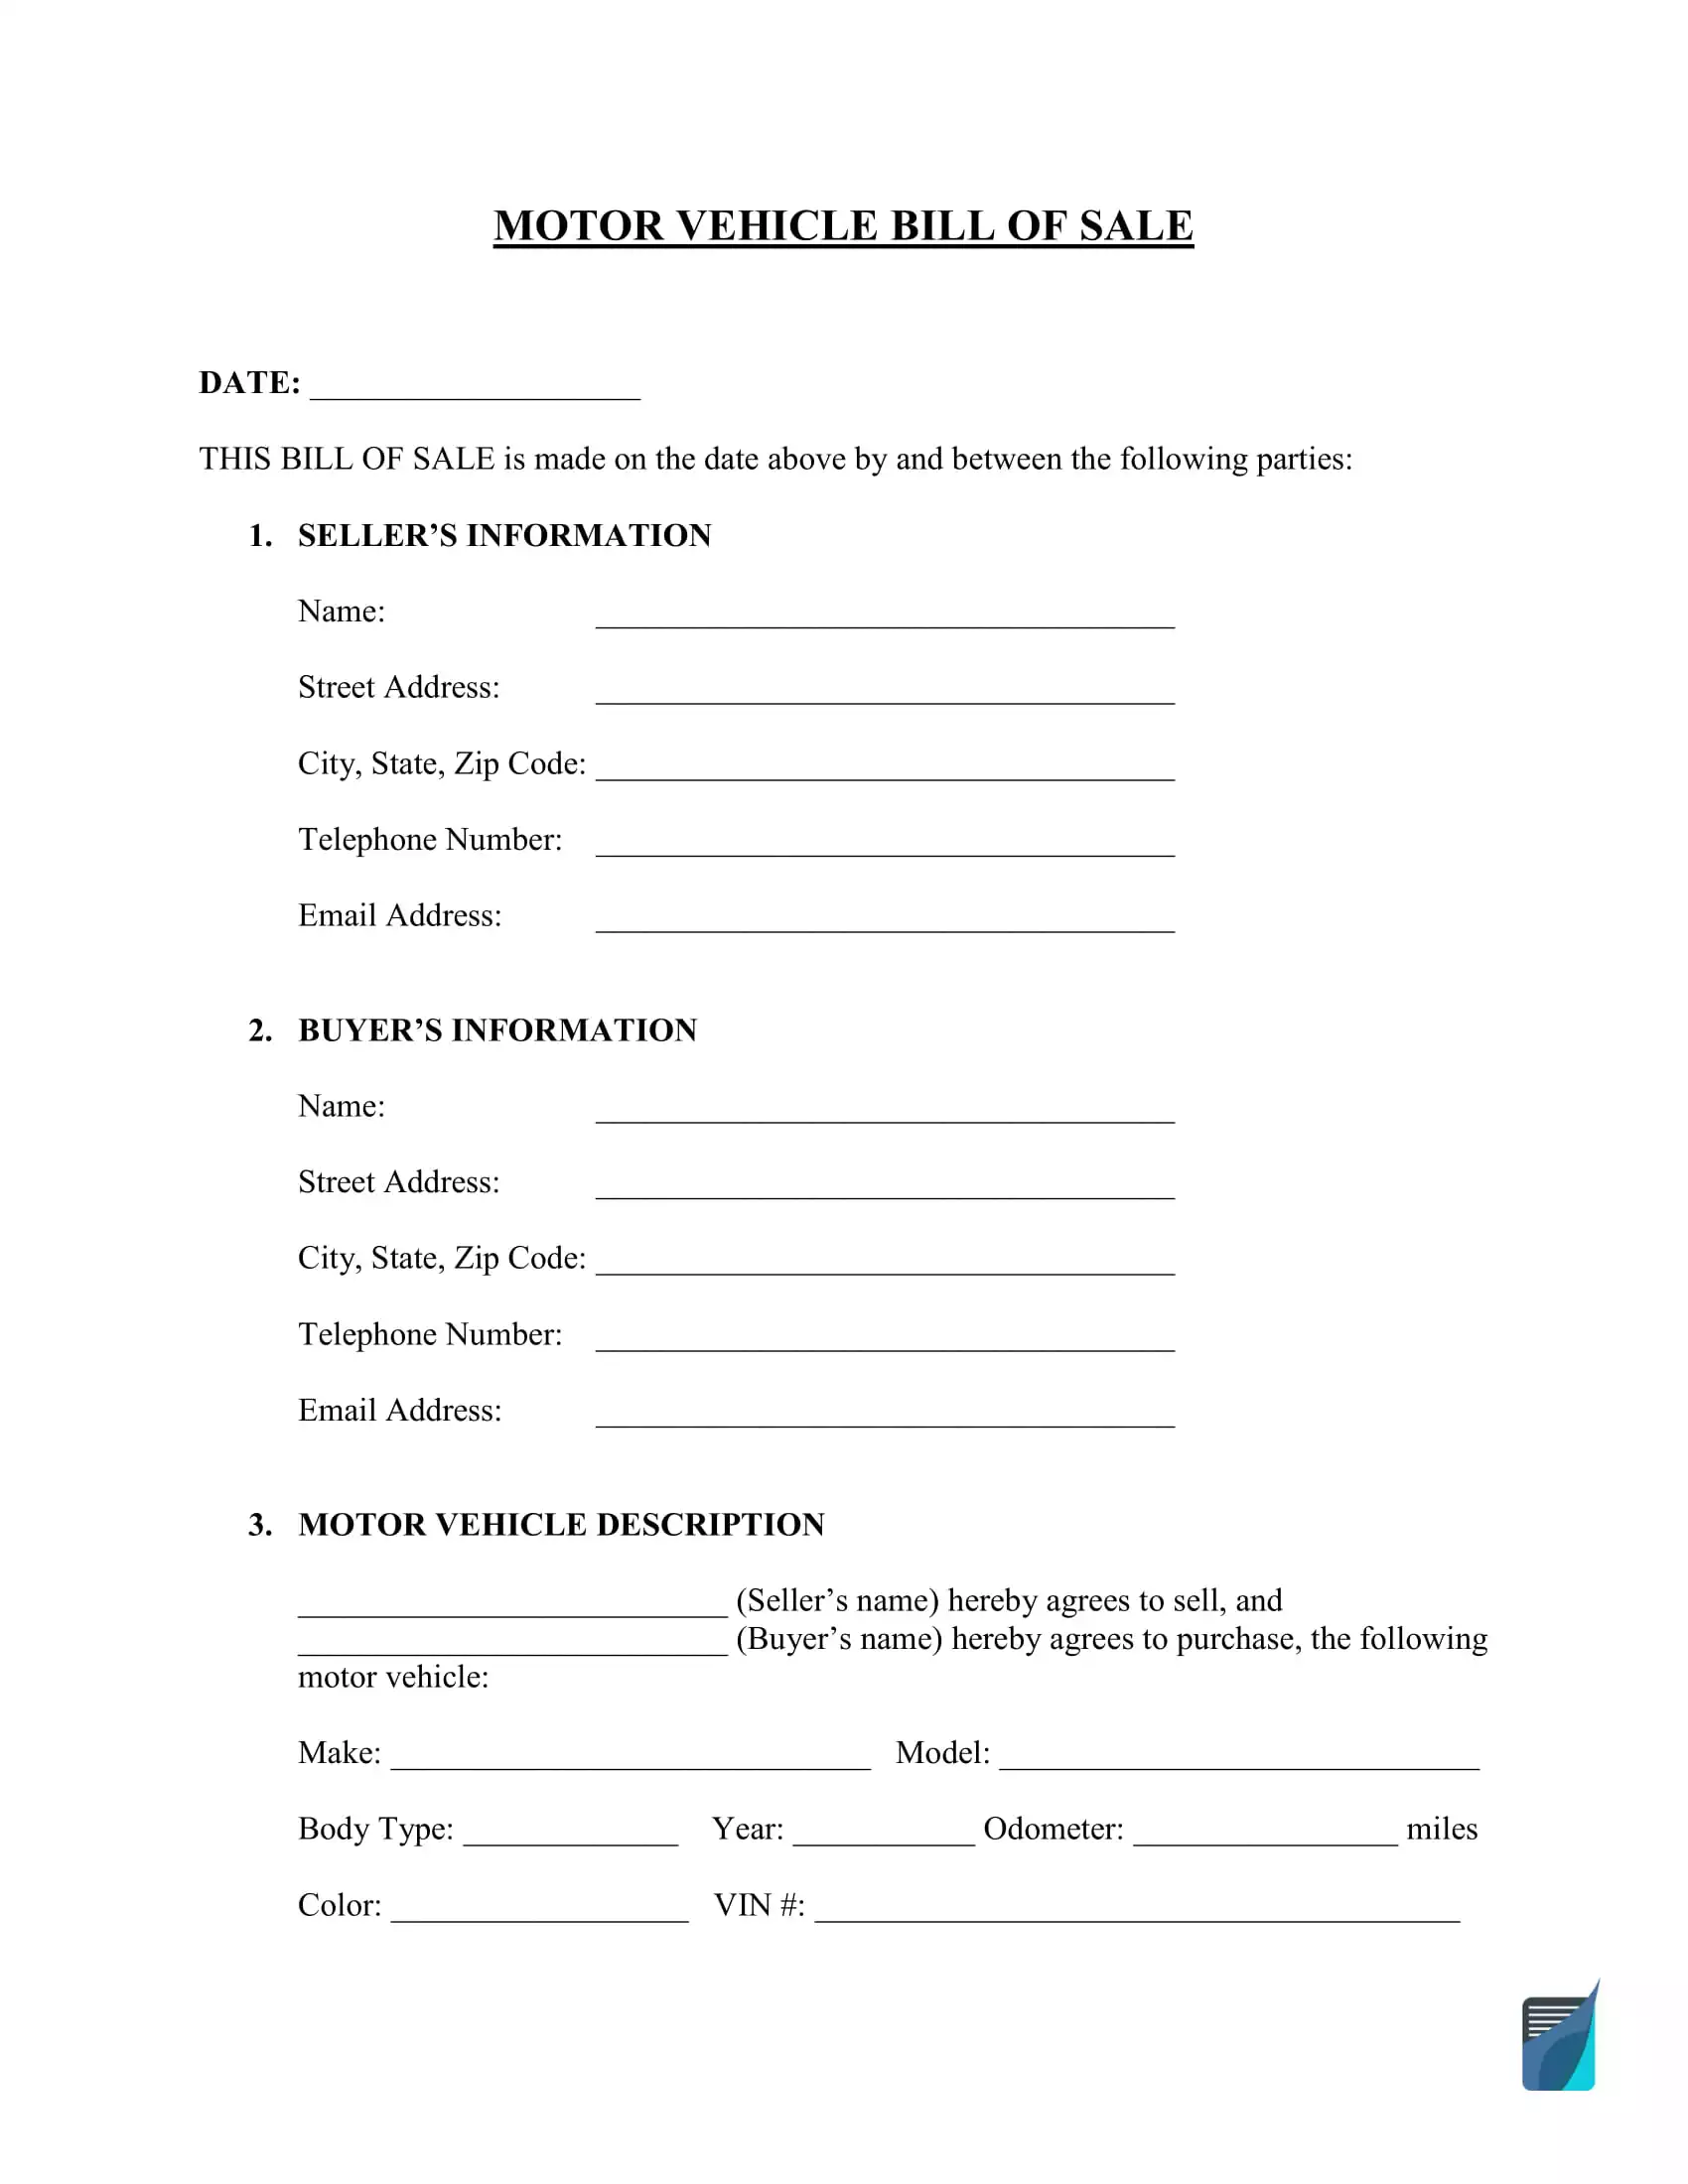 Bill of Sale Template - Free PDF  Word Forms - FormsPal Throughout Car Bill Of Sale Word Template